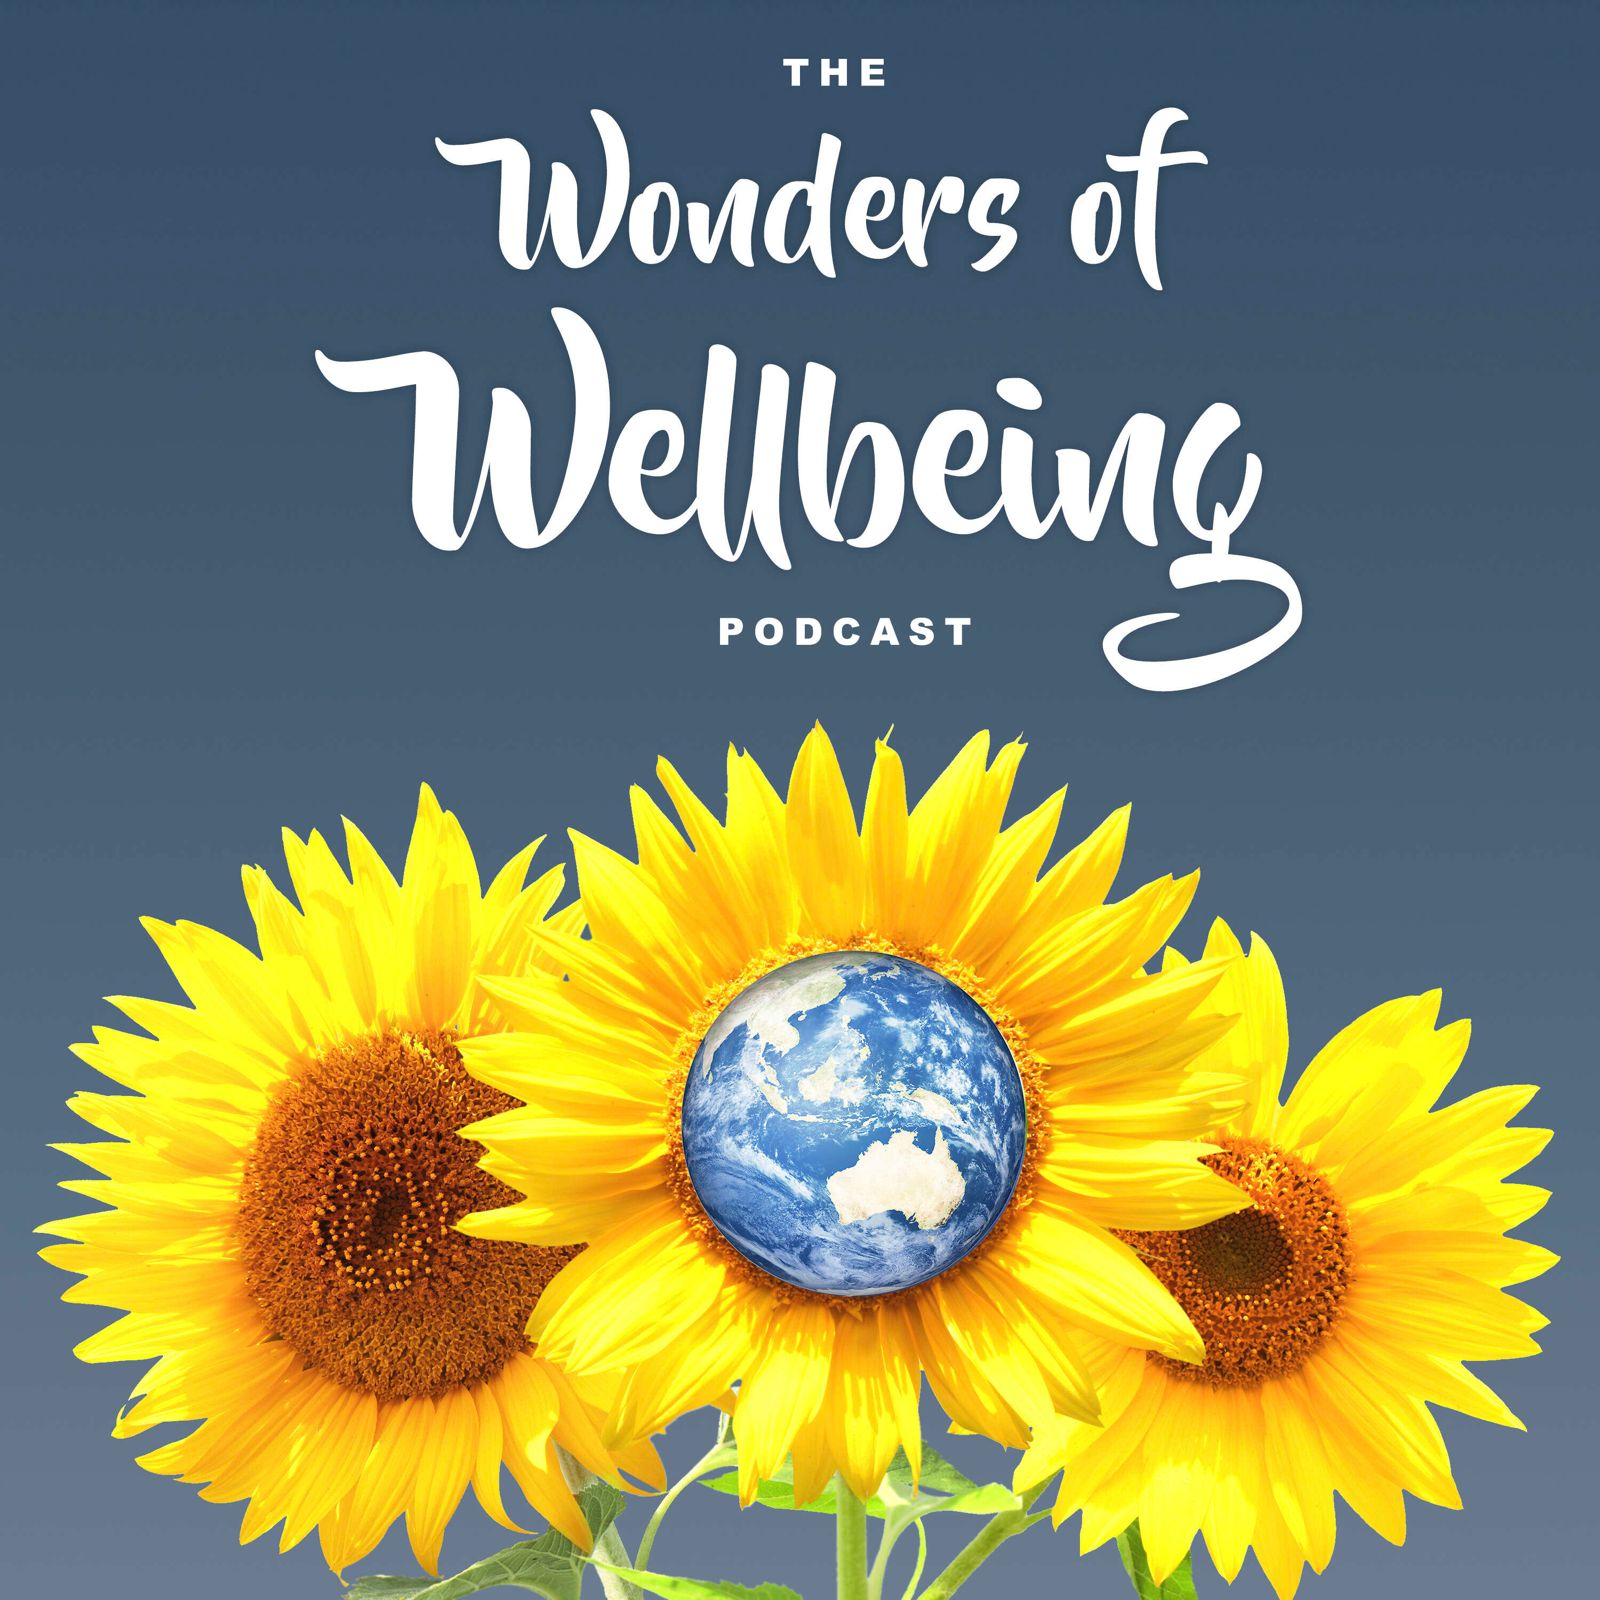 The Wonders of Wellbeing Podcast.jpeg